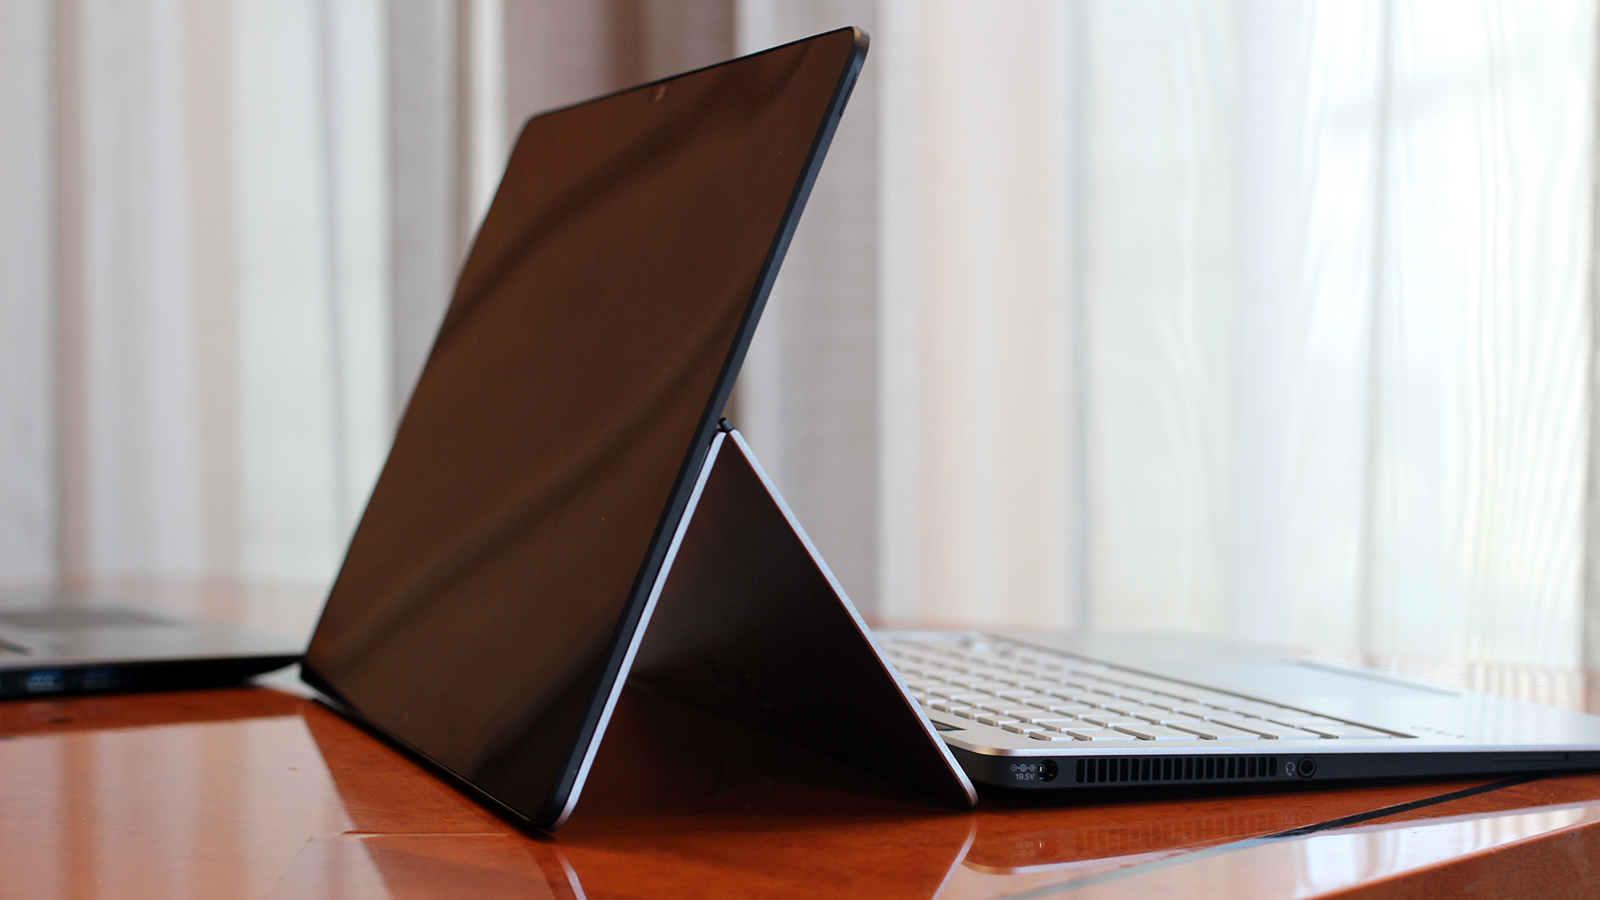 Sony Vaio Flip: One Of The Most Logical Laptop Convertibles Yet